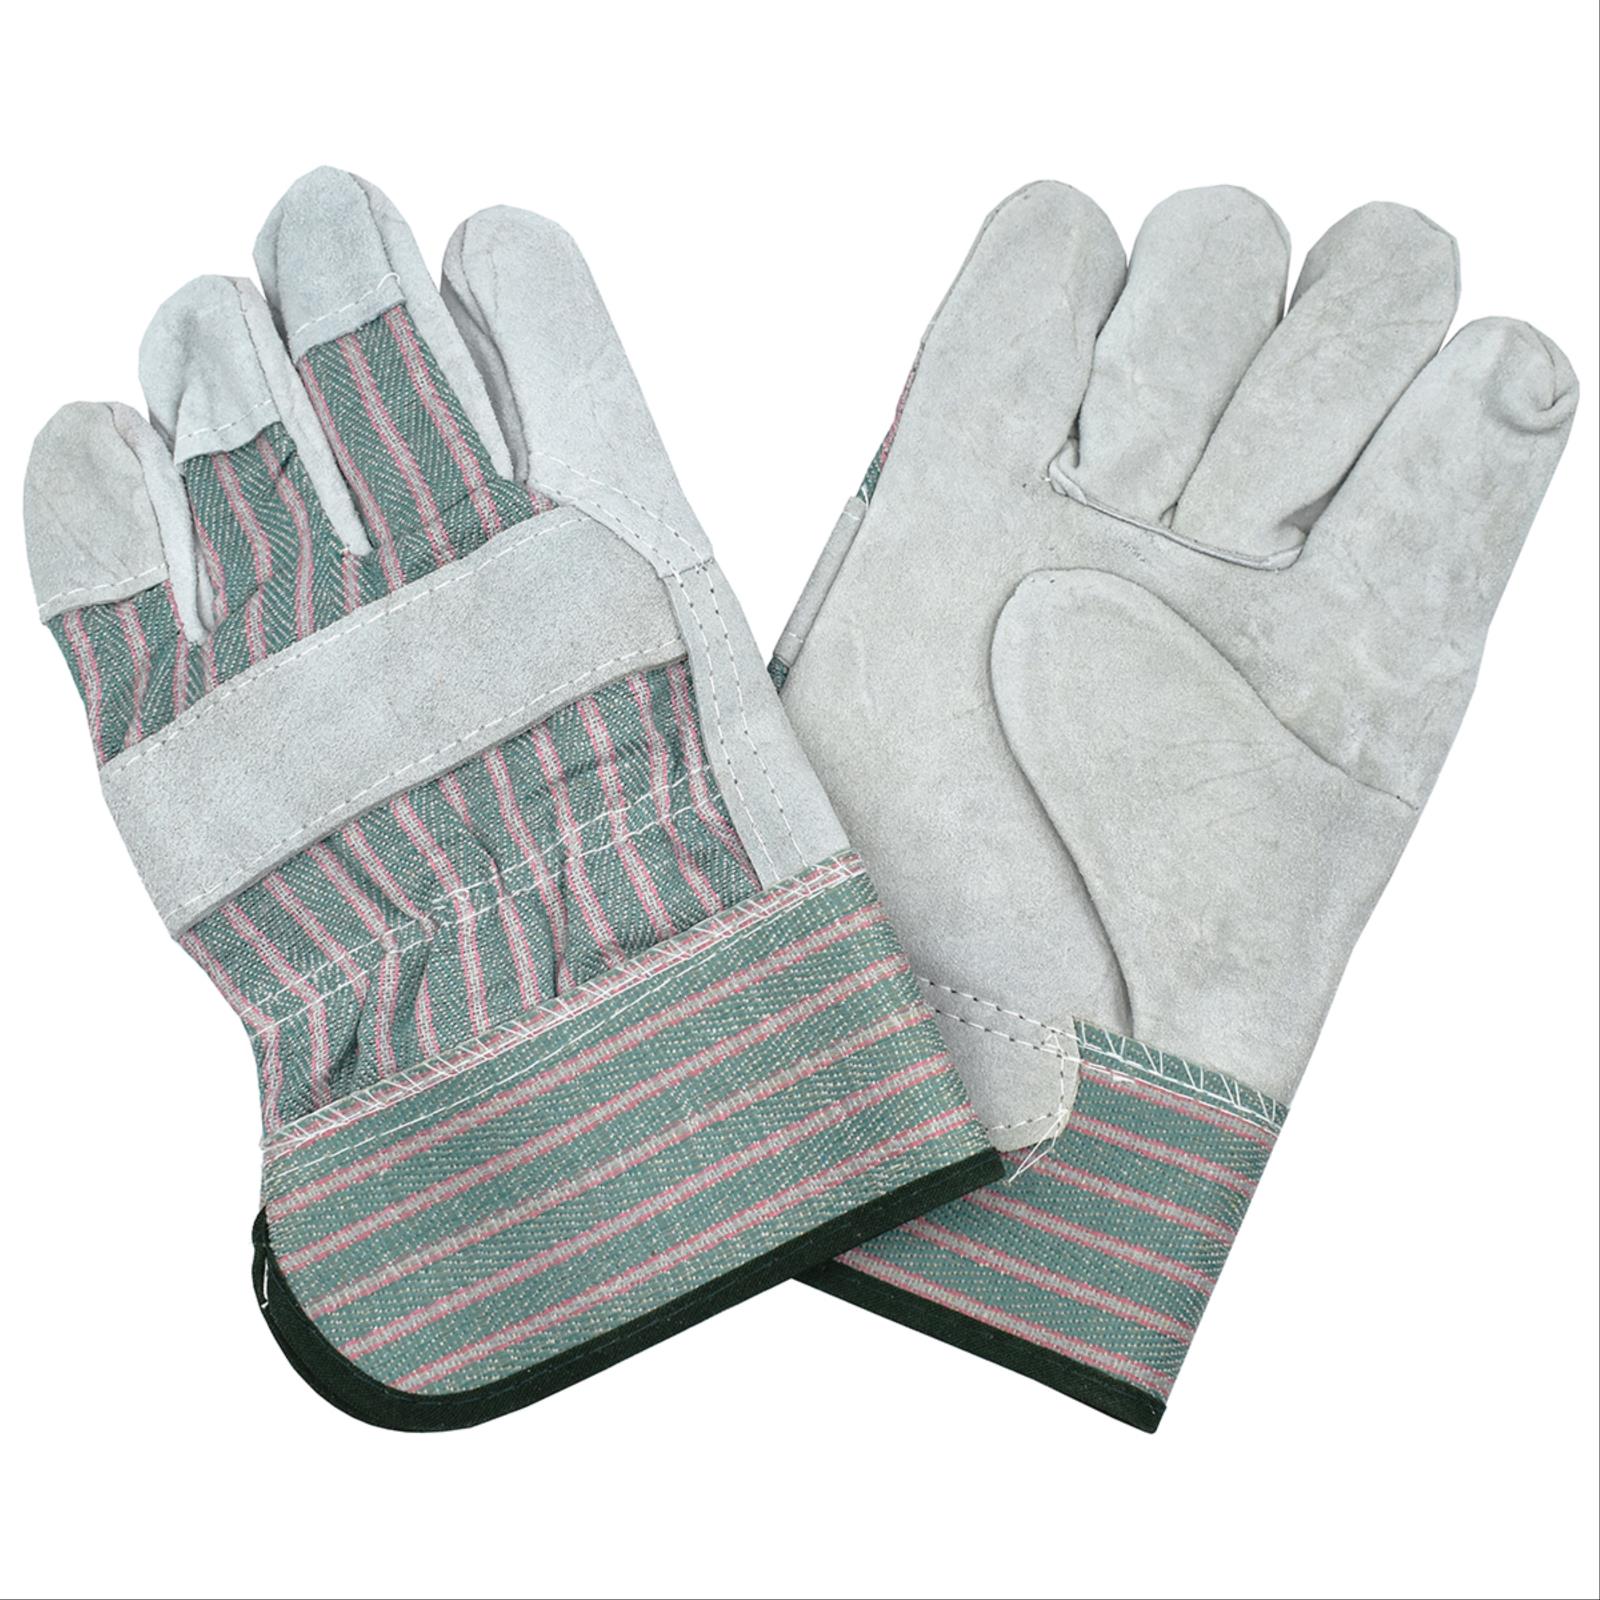 Heavy Duty Leather Palm Gloves